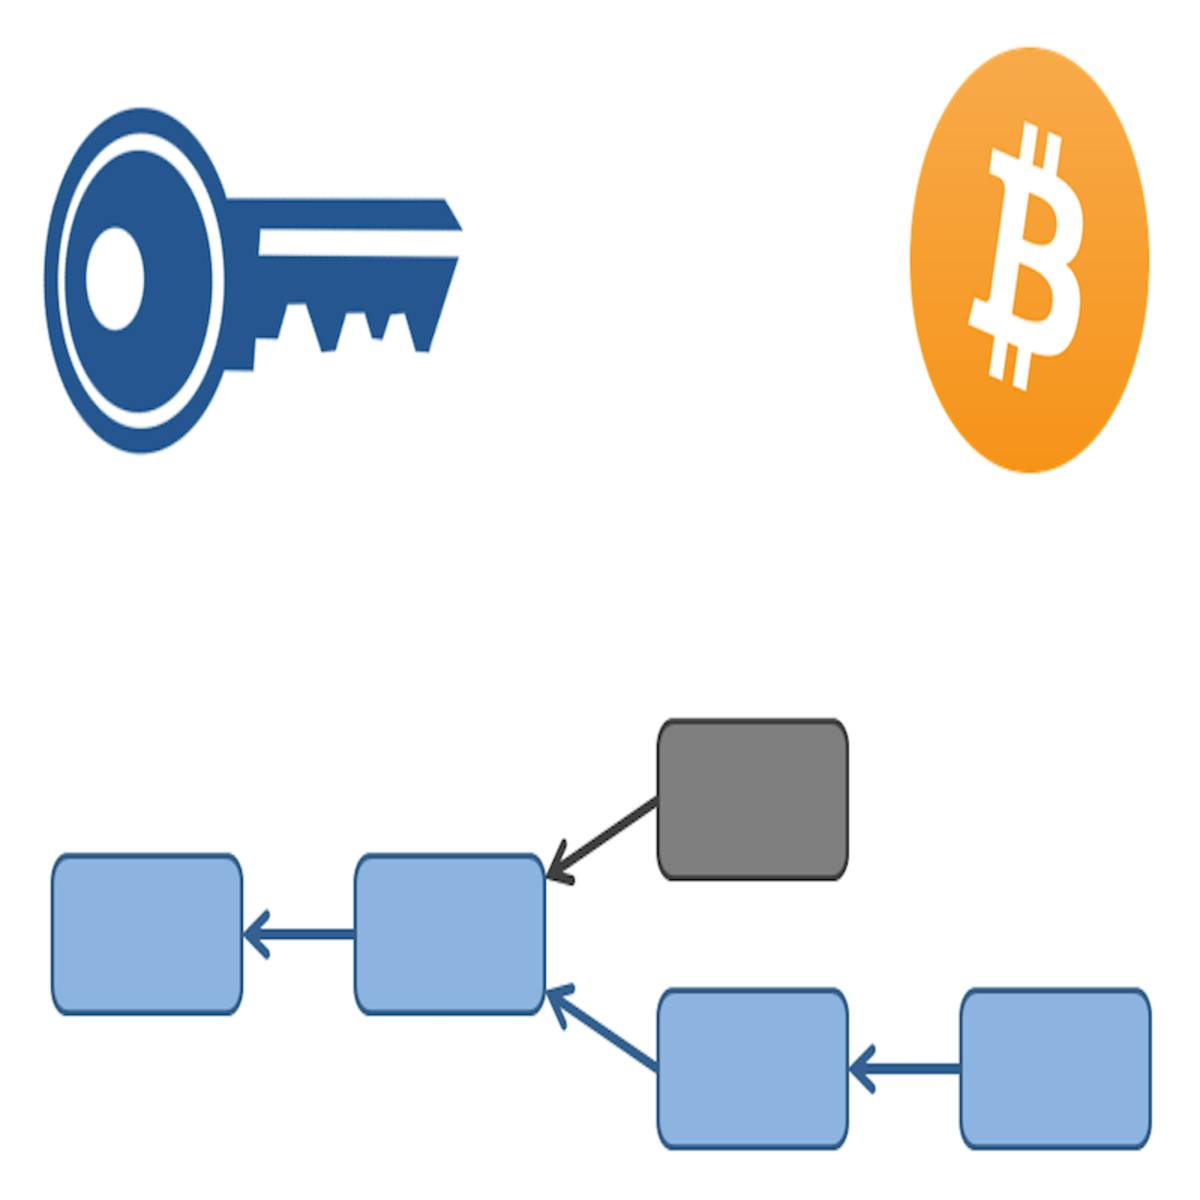 Https www.coursera.org learn cryptocurrency home welcome how to buy bitcoins btc-e